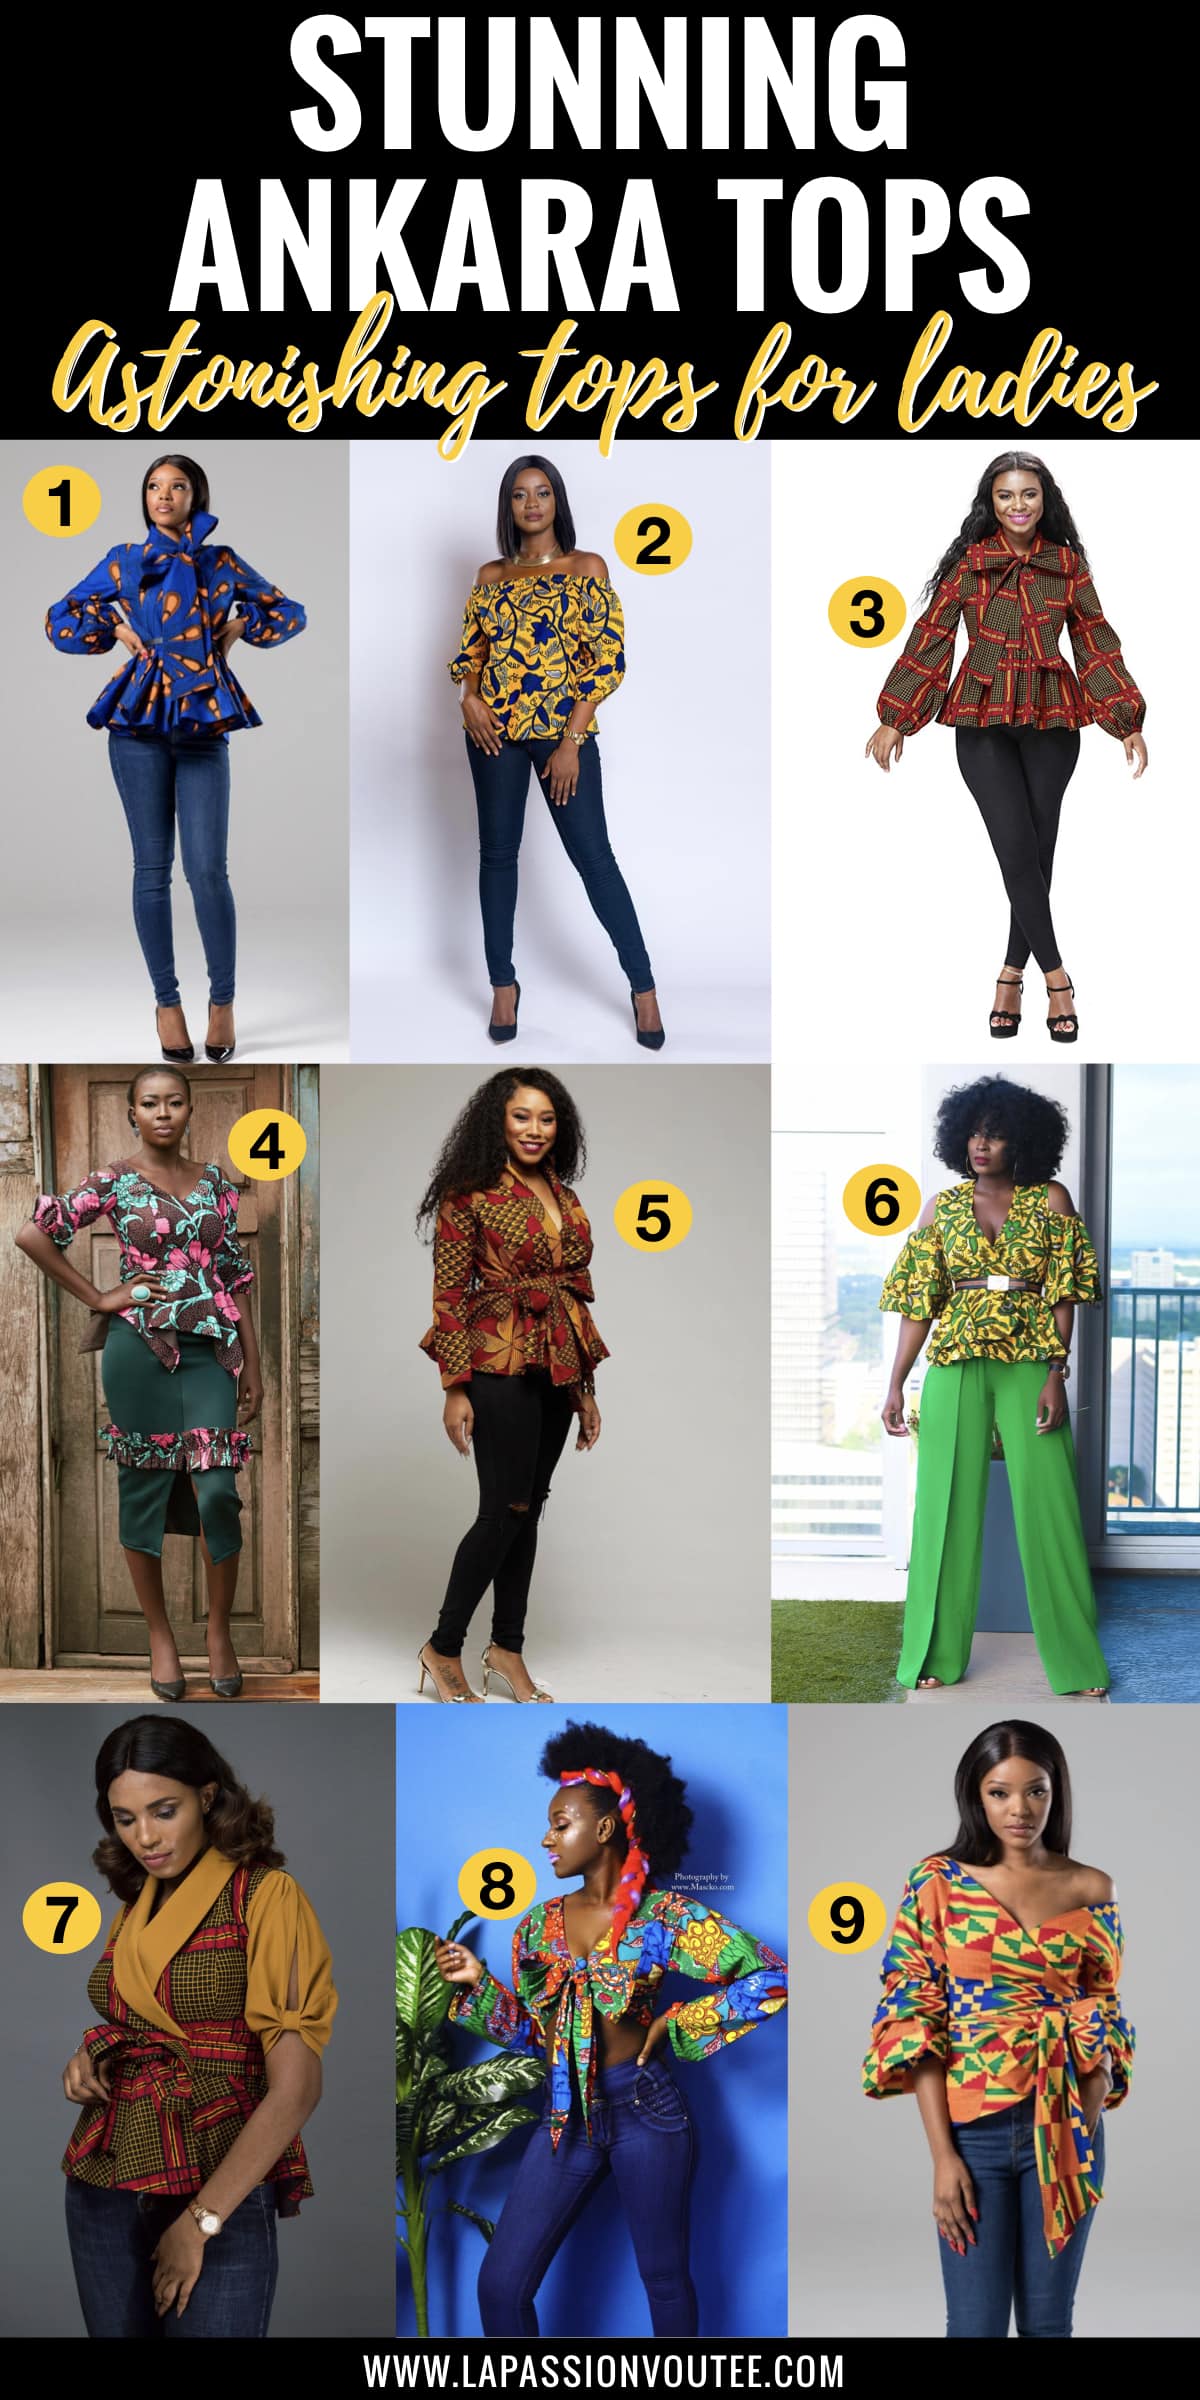 #africanprint #ankarastyles 20 best ankara tops for ladies every African print lover should have in their wardrobe. From affordable ankara peplum tops, and African print crop tops to off the shoulder tops and even more stunning ankara top styles to rock this year. And details on where to African print clothes online for less.